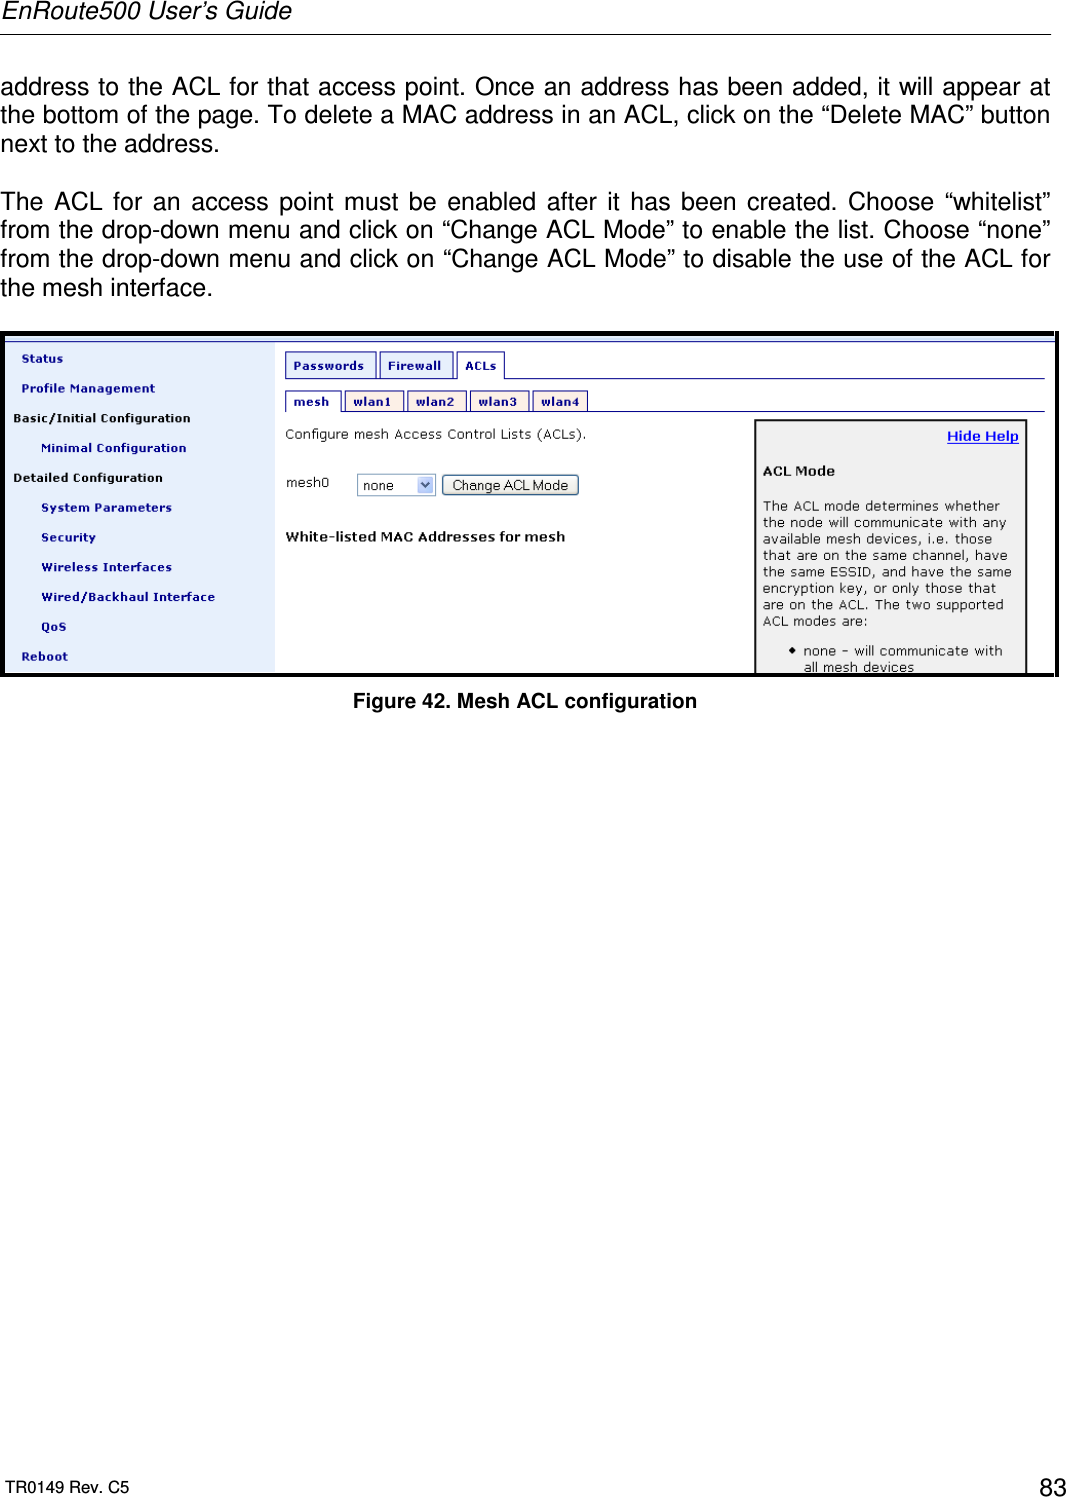 EnRoute500 User’s Guide  TR0149 Rev. C5  83 address to the ACL for that access point. Once an address has been added, it will appear at the bottom of the page. To delete a MAC address in an ACL, click on the “Delete MAC” button next to the address.  The  ACL  for  an  access  point  must  be  enabled  after  it  has  been  created.  Choose  “whitelist” from the drop-down menu and click on “Change ACL Mode” to enable the list. Choose “none” from the drop-down menu and click on “Change ACL Mode” to disable the use of the ACL for the mesh interface.   Figure 42. Mesh ACL configuration 